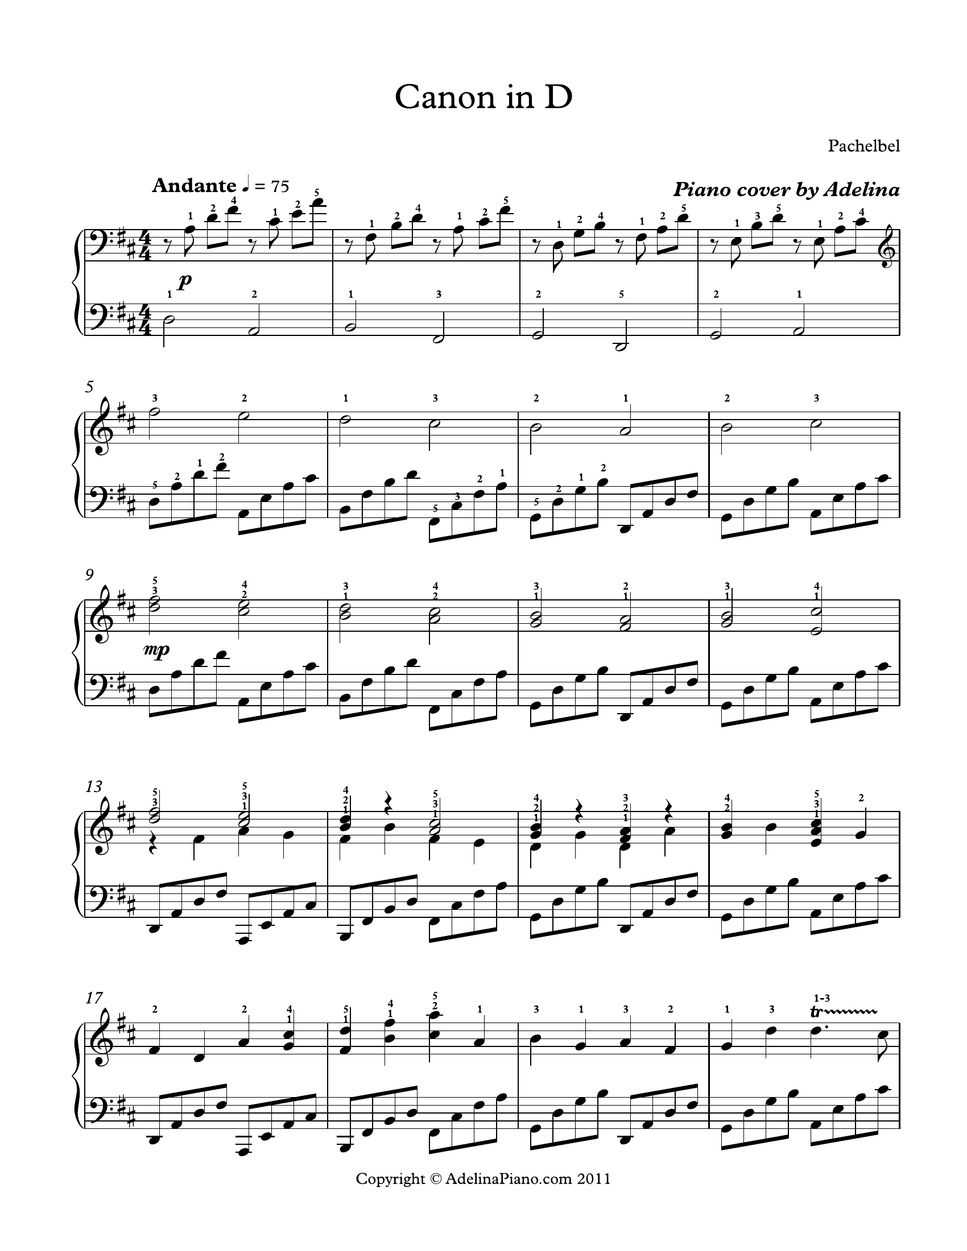 Pachelbel - Canon in D Sheet by Adelina Piano